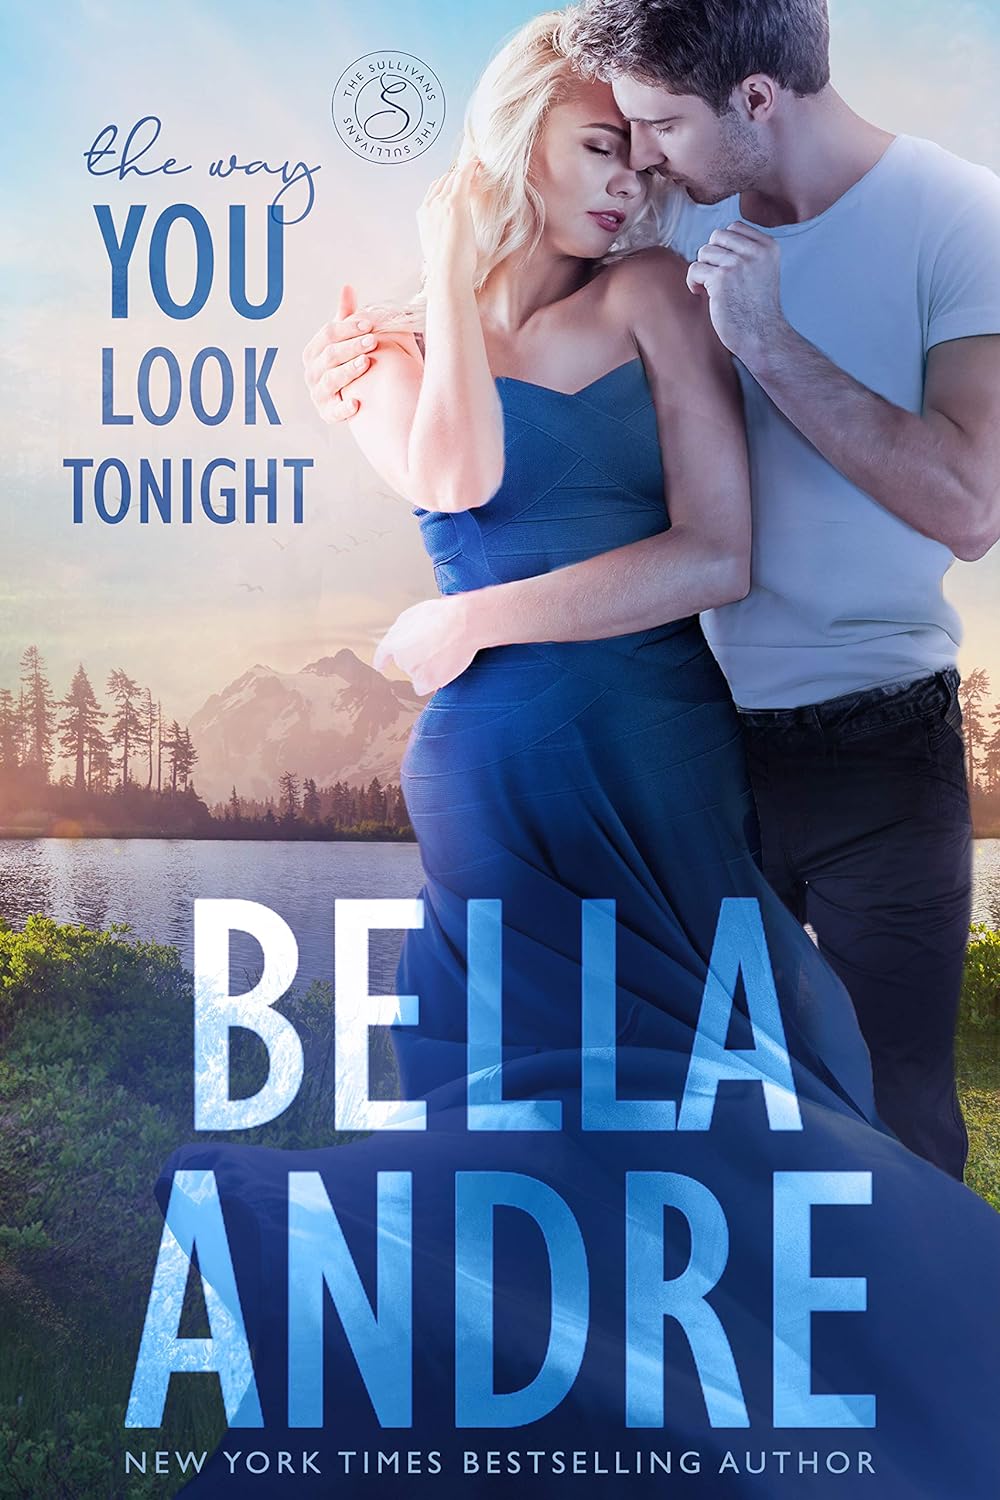 The Way You Look Tonight by Bella Andre